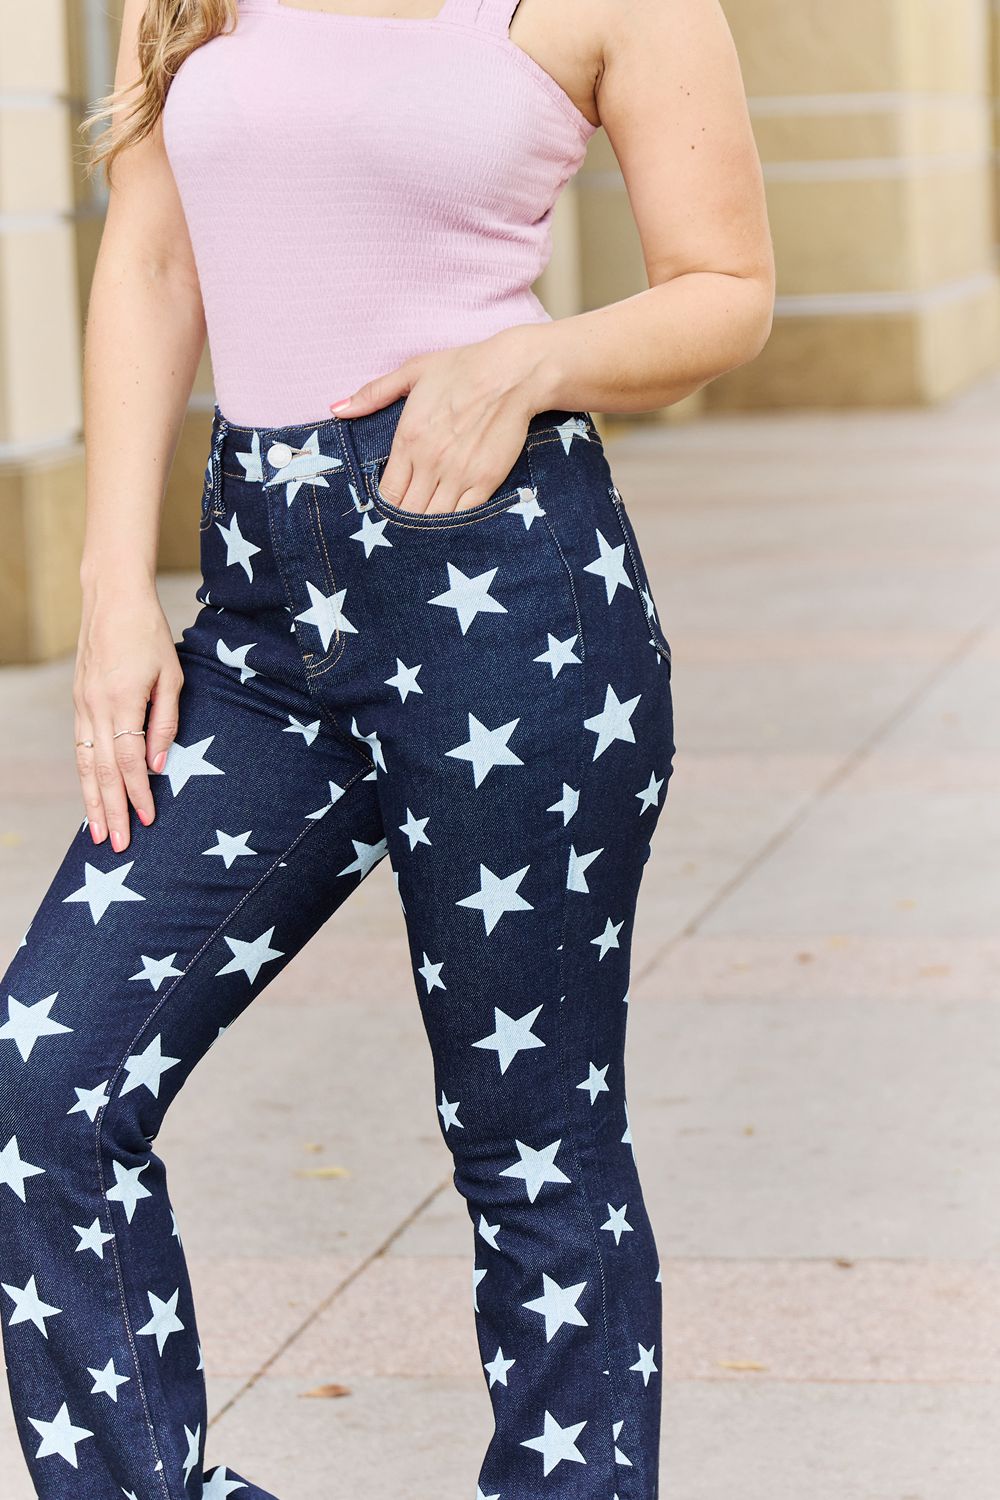 Judy Blue Janelle Full Size High Waist Star Print Flare Jeans free shipping -Oh Em Gee Boutique